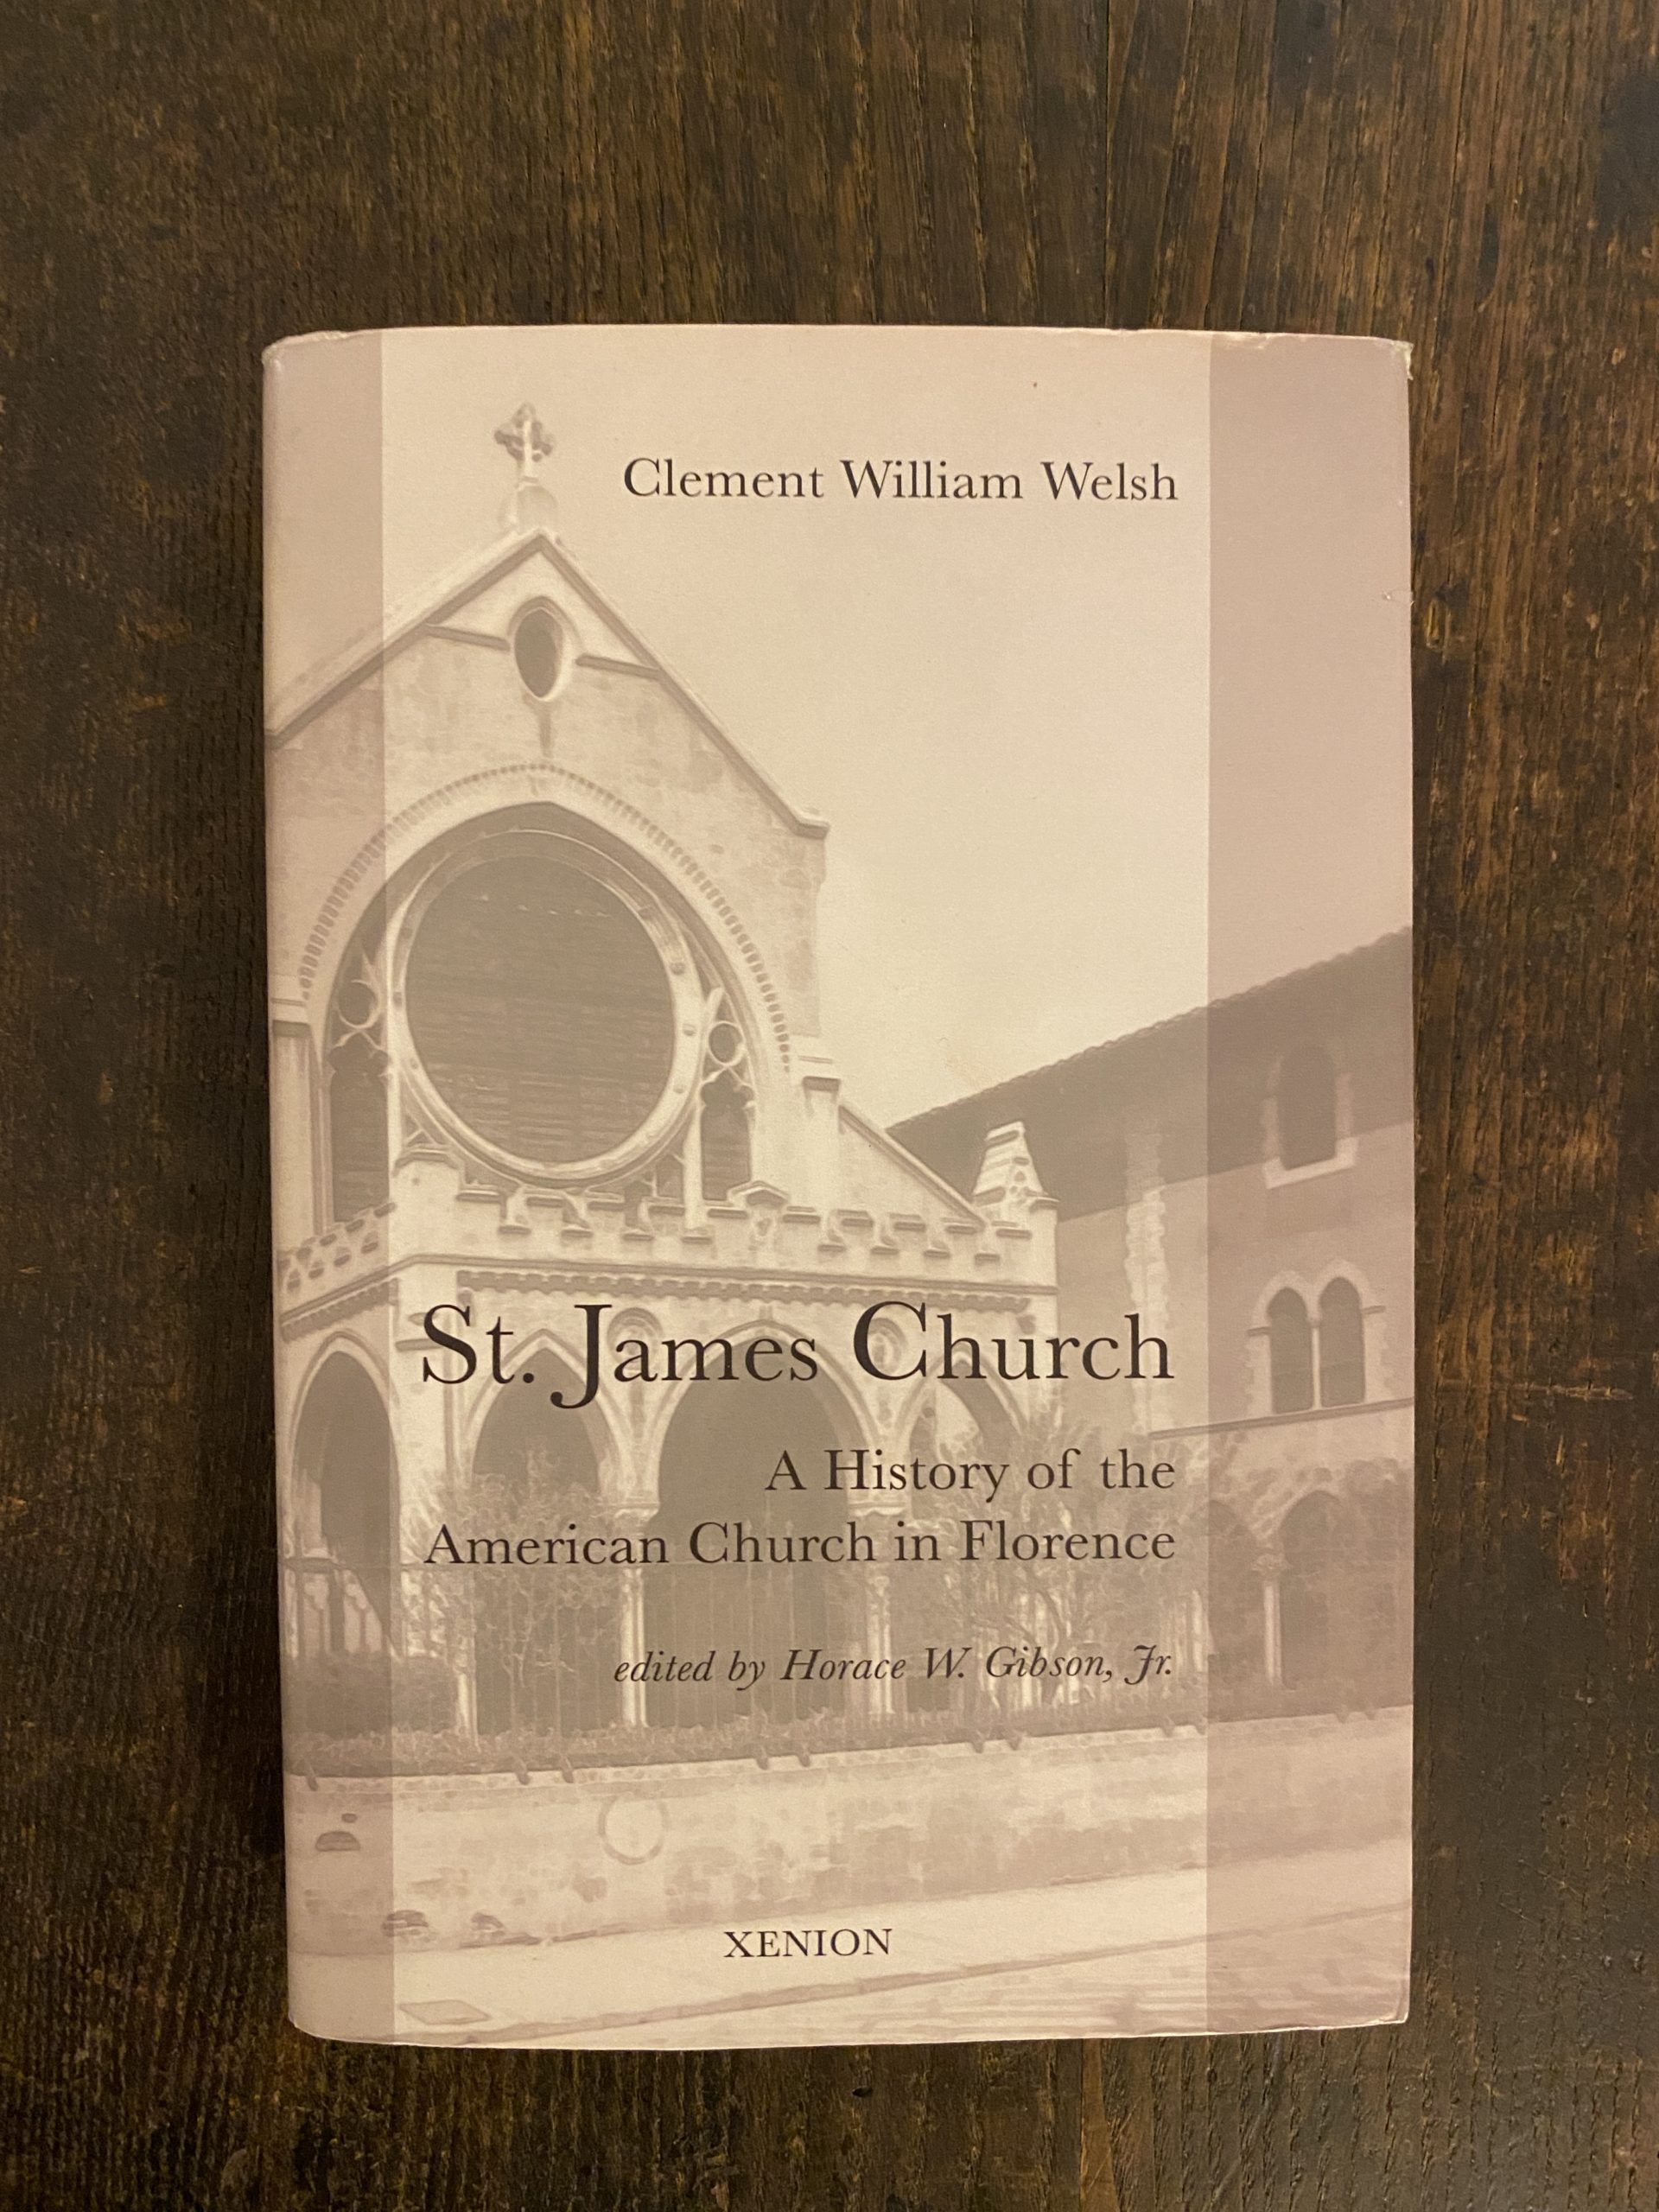 Book: St James Church in Florence by The Rev. Canon Clement W. Welsh.